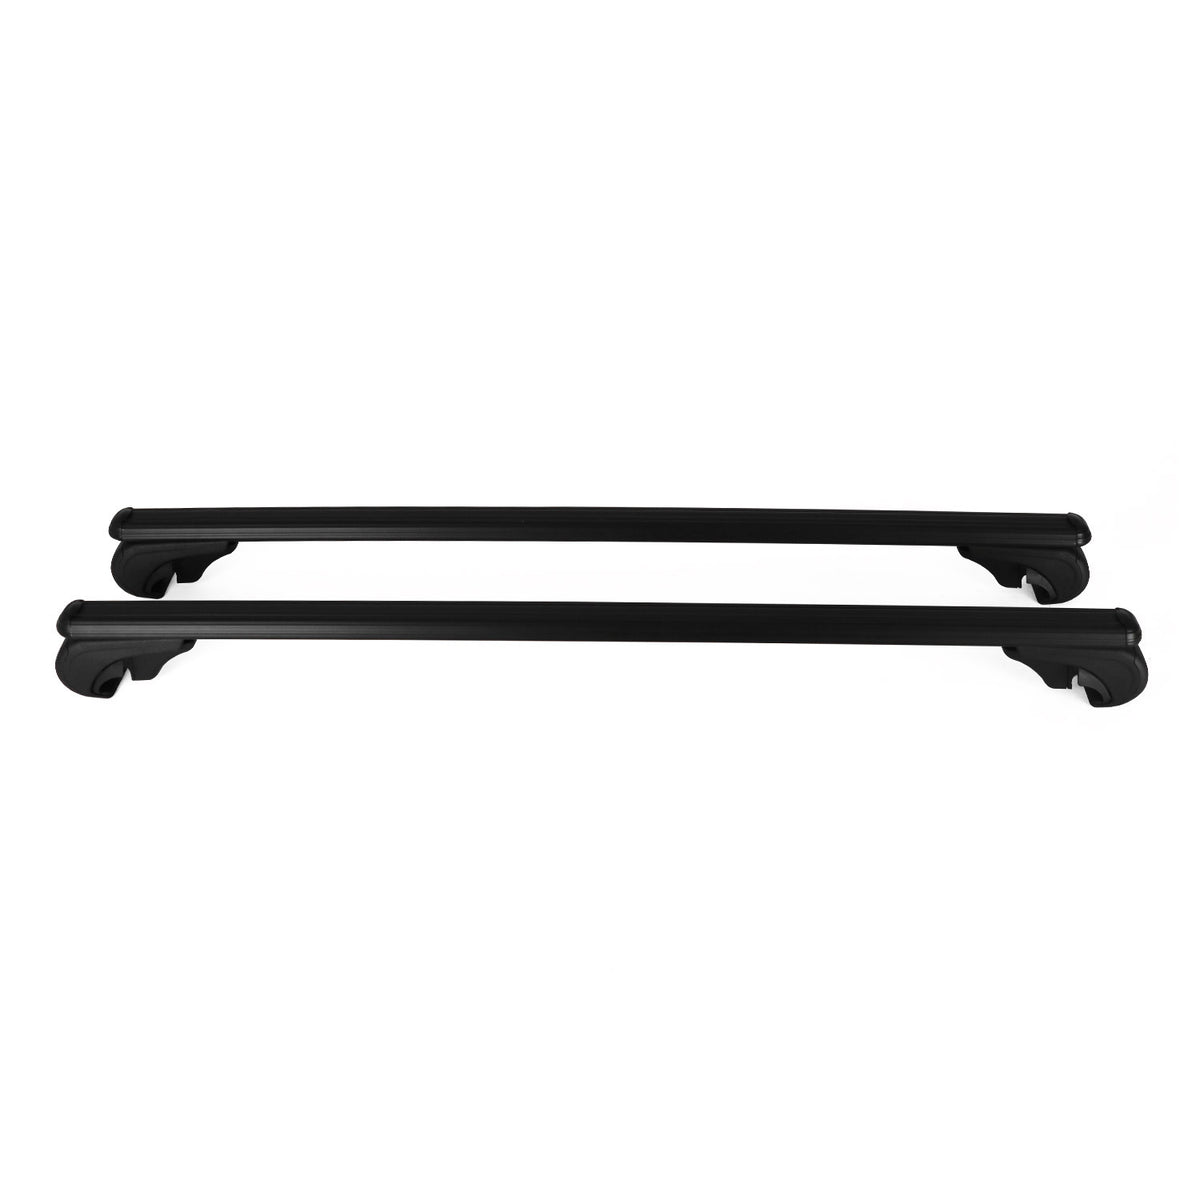 Roof rack for Ford Ranger double cab 2011-2023 luggage rack aluminum black 2x